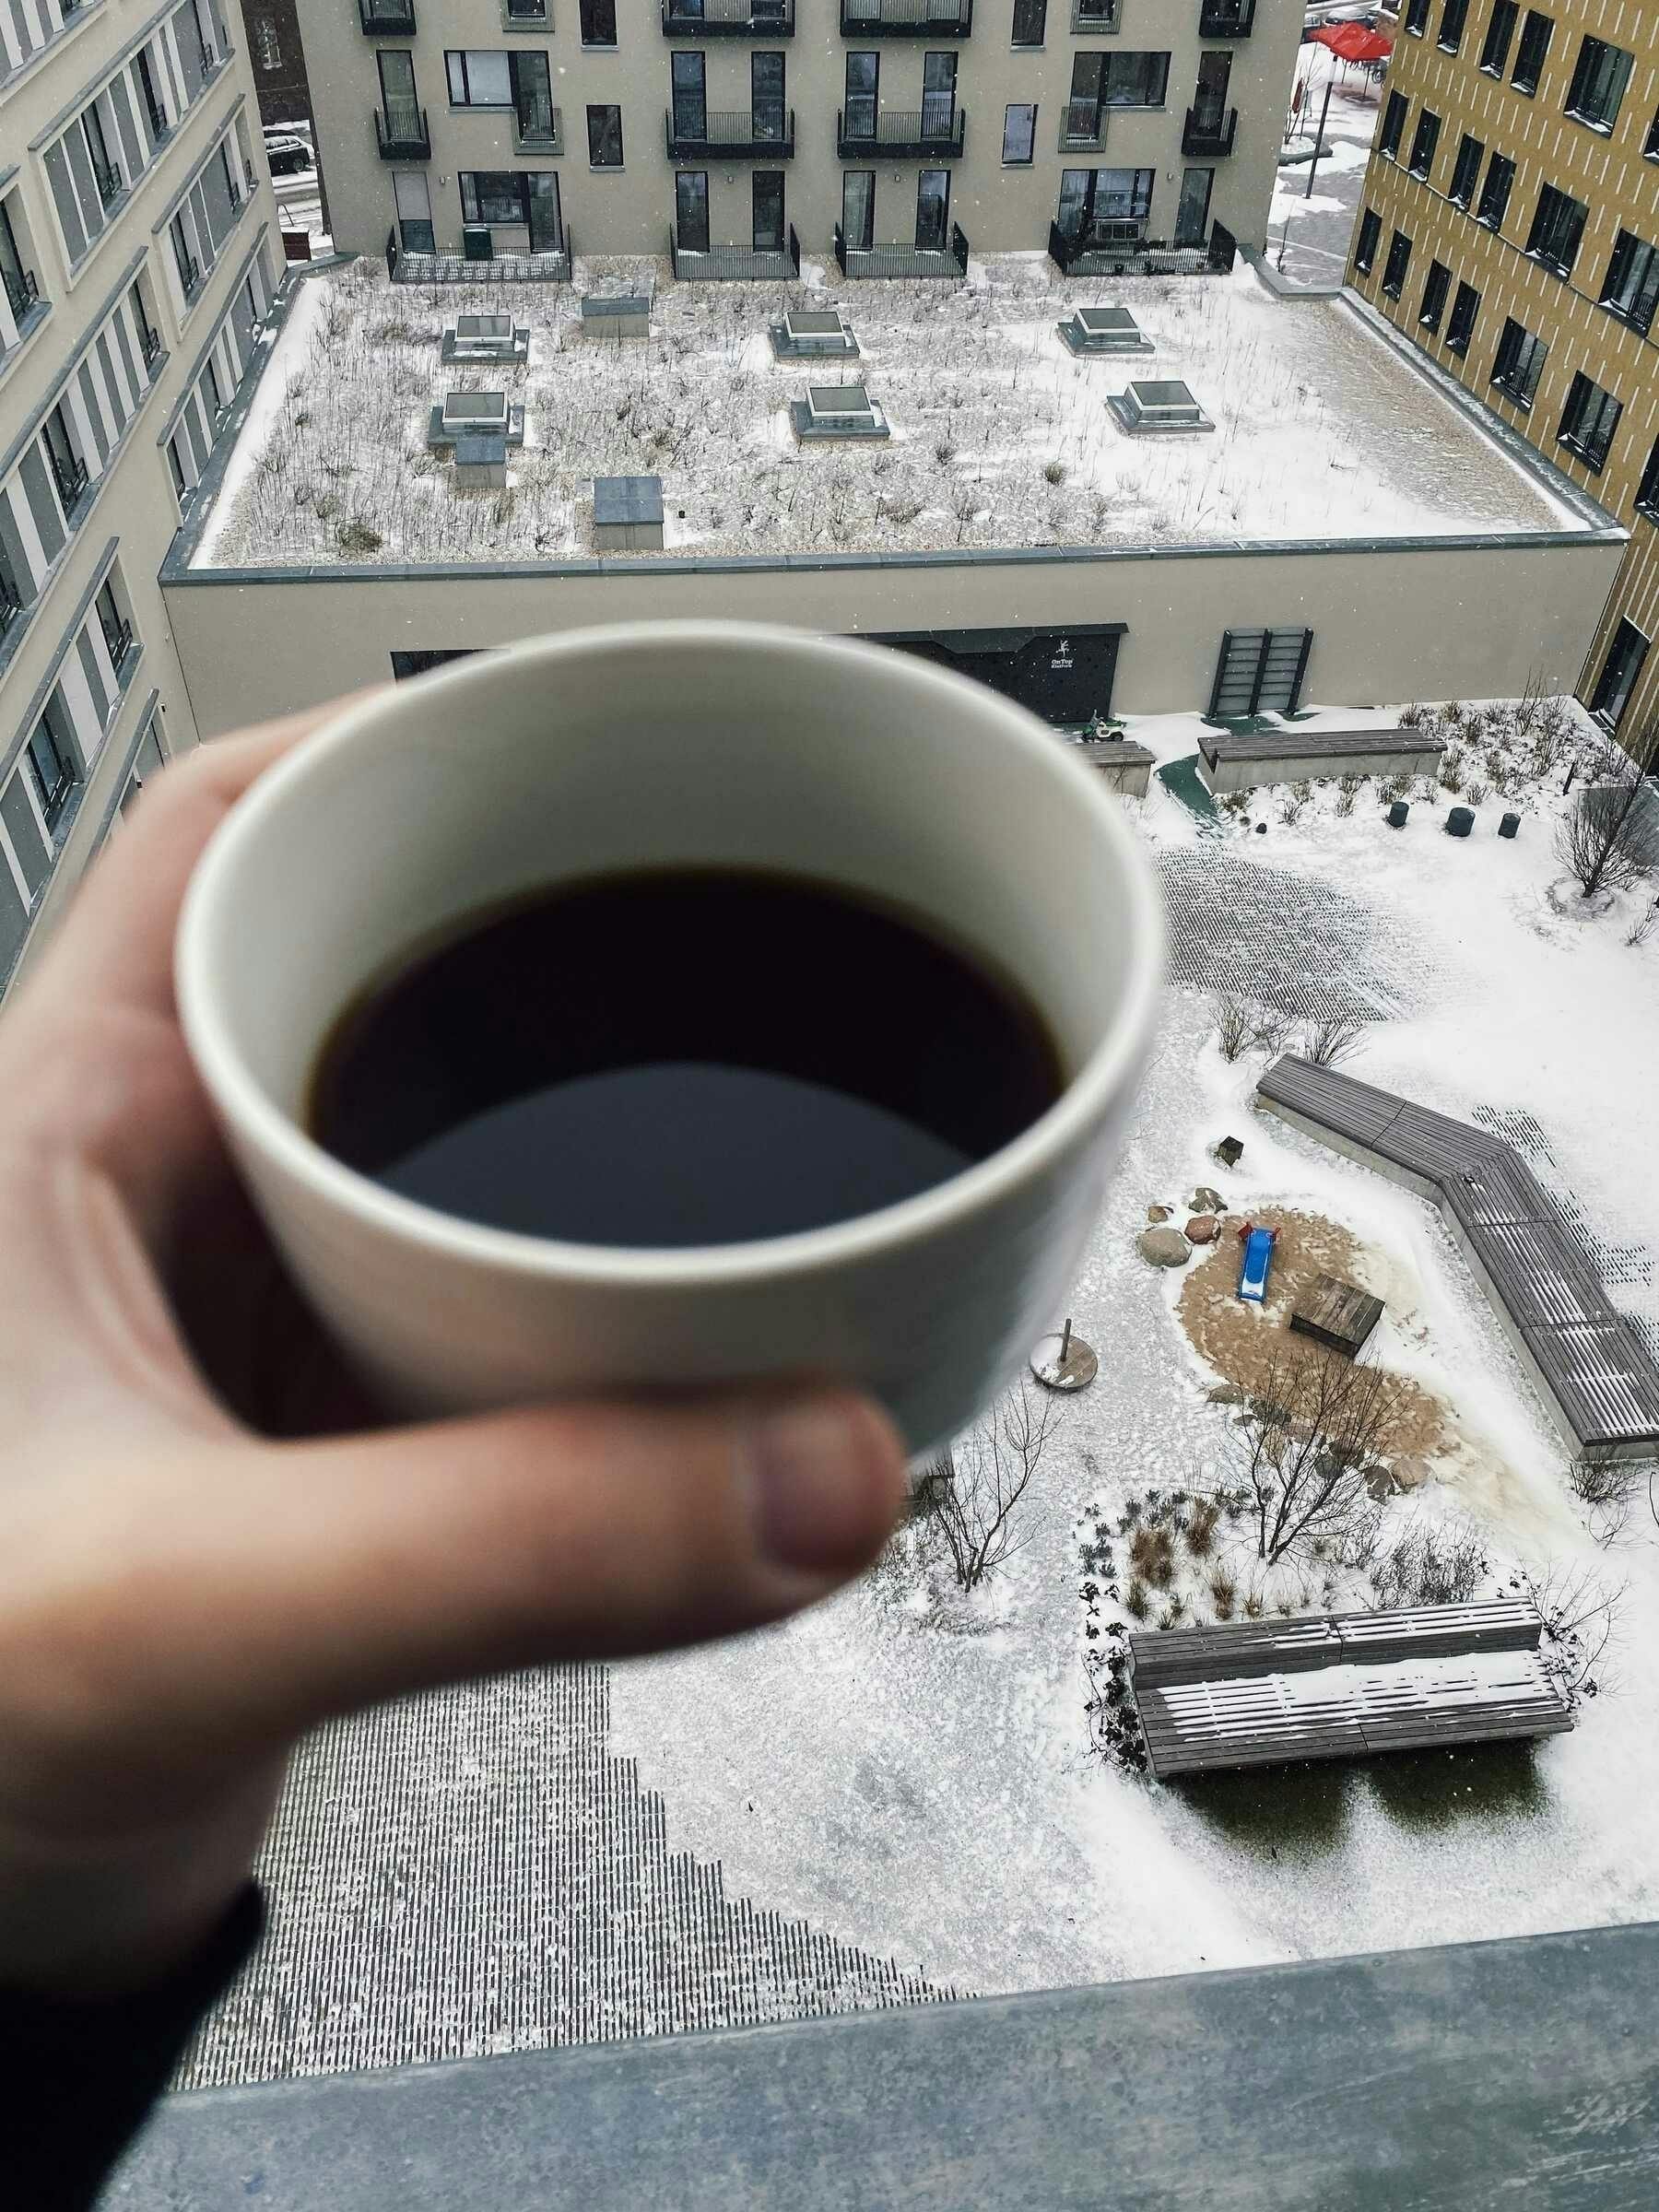 a hand holding a cup of coffee in the balcony with view of backyard covered in snow; with the backyard in focus